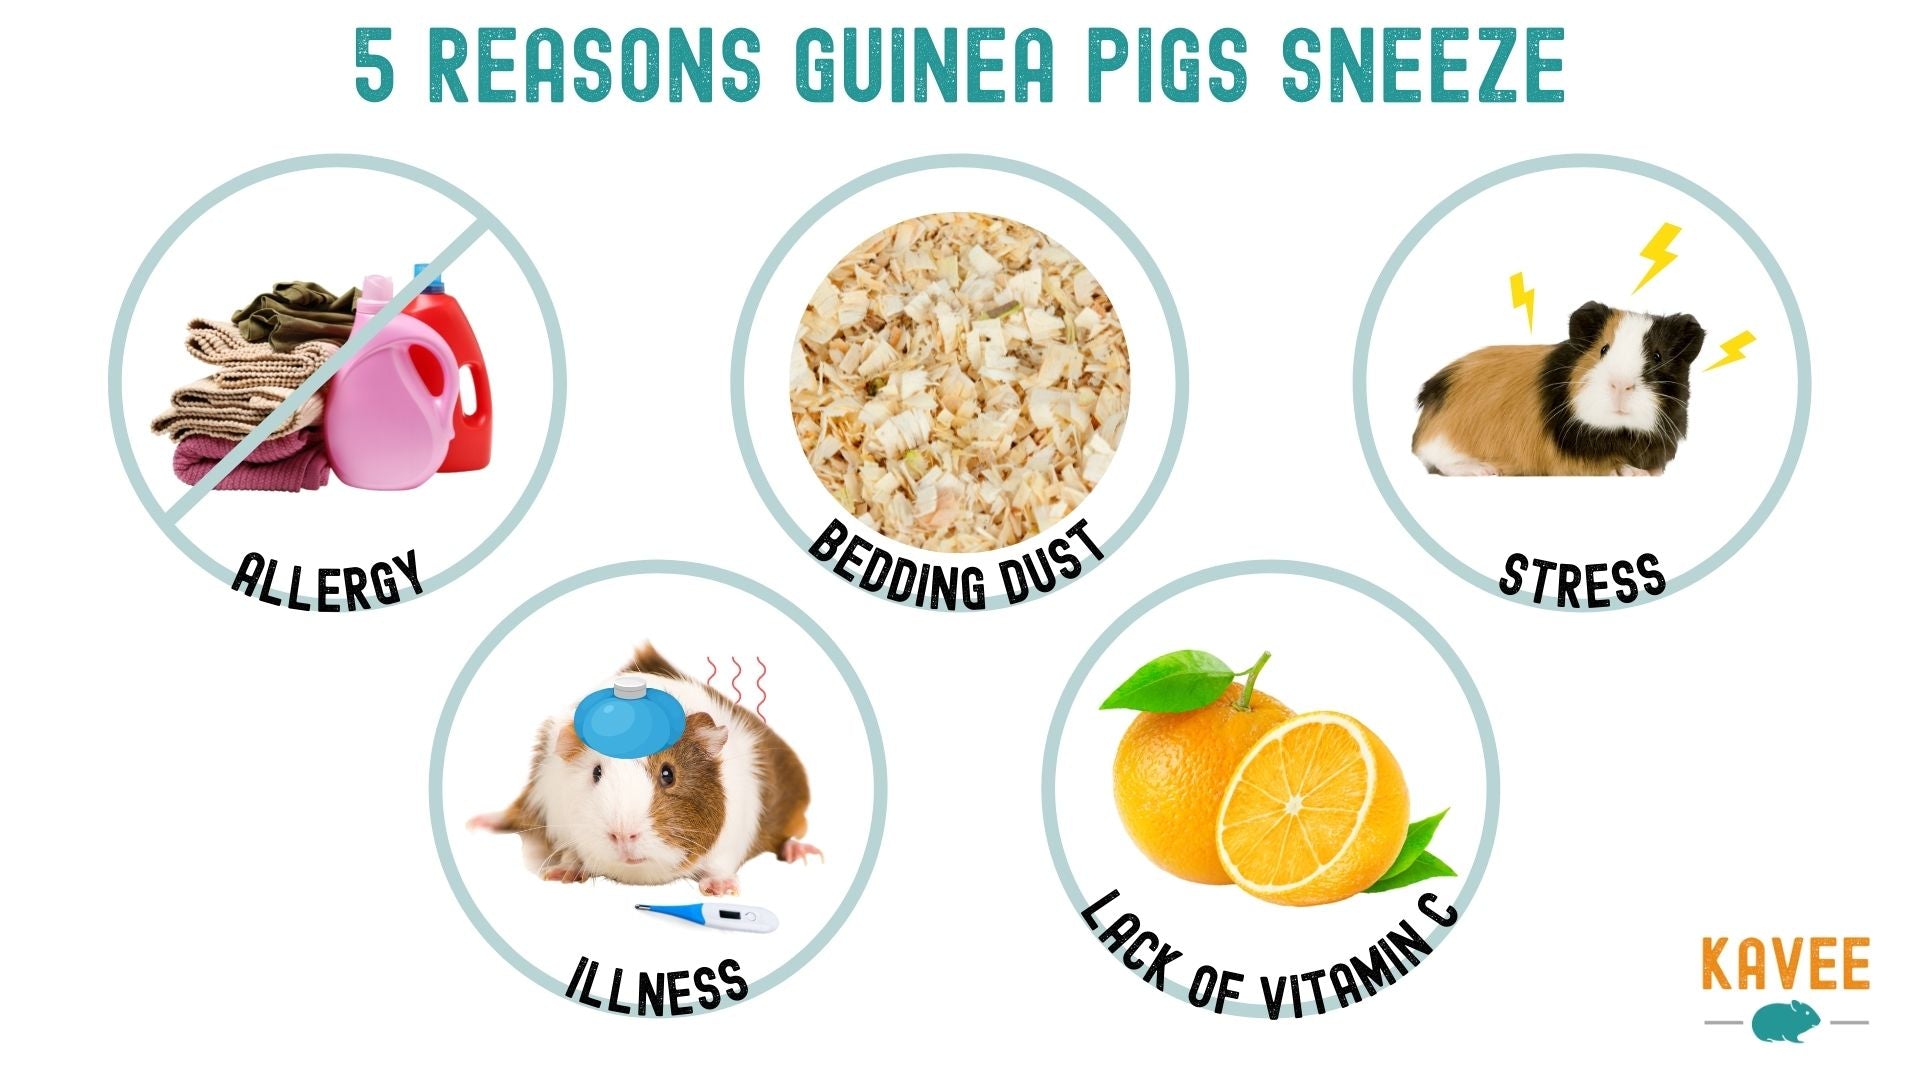 guinea pigs can sneeze because of allergies bedding illness stress dust stress illness and lack of vitamin c